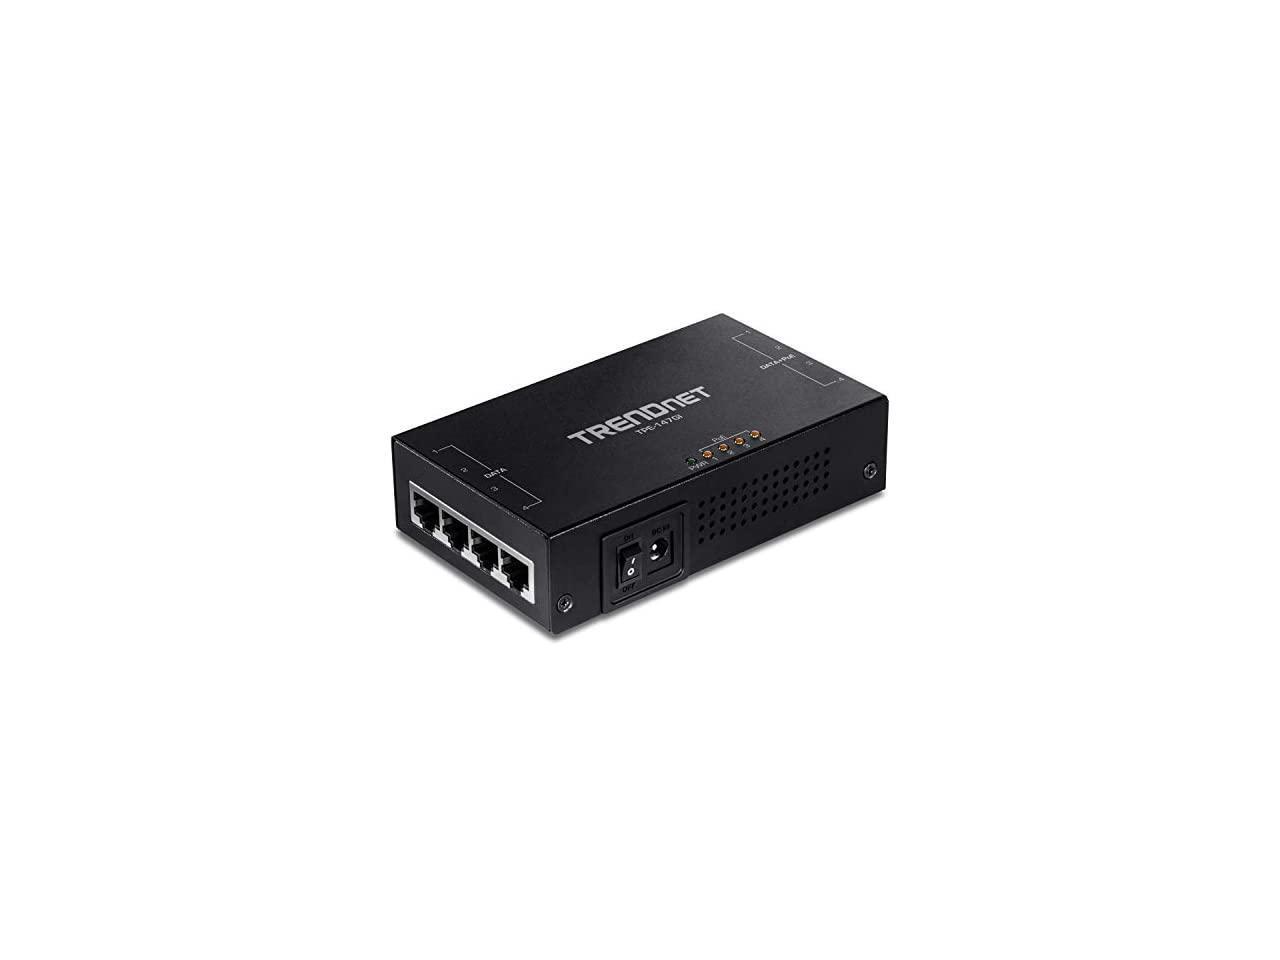 TPE-147GI Multi-Port PoE+ Injector up to 100m Data + PoE Out 328 ft. Add PoE+ Power to Non-PoE Switch 4 x Gigabit Ports TRENDnet 65W 4-Port Gigabit PoE+ Injector Data in 4 x gigabit PoE Ports